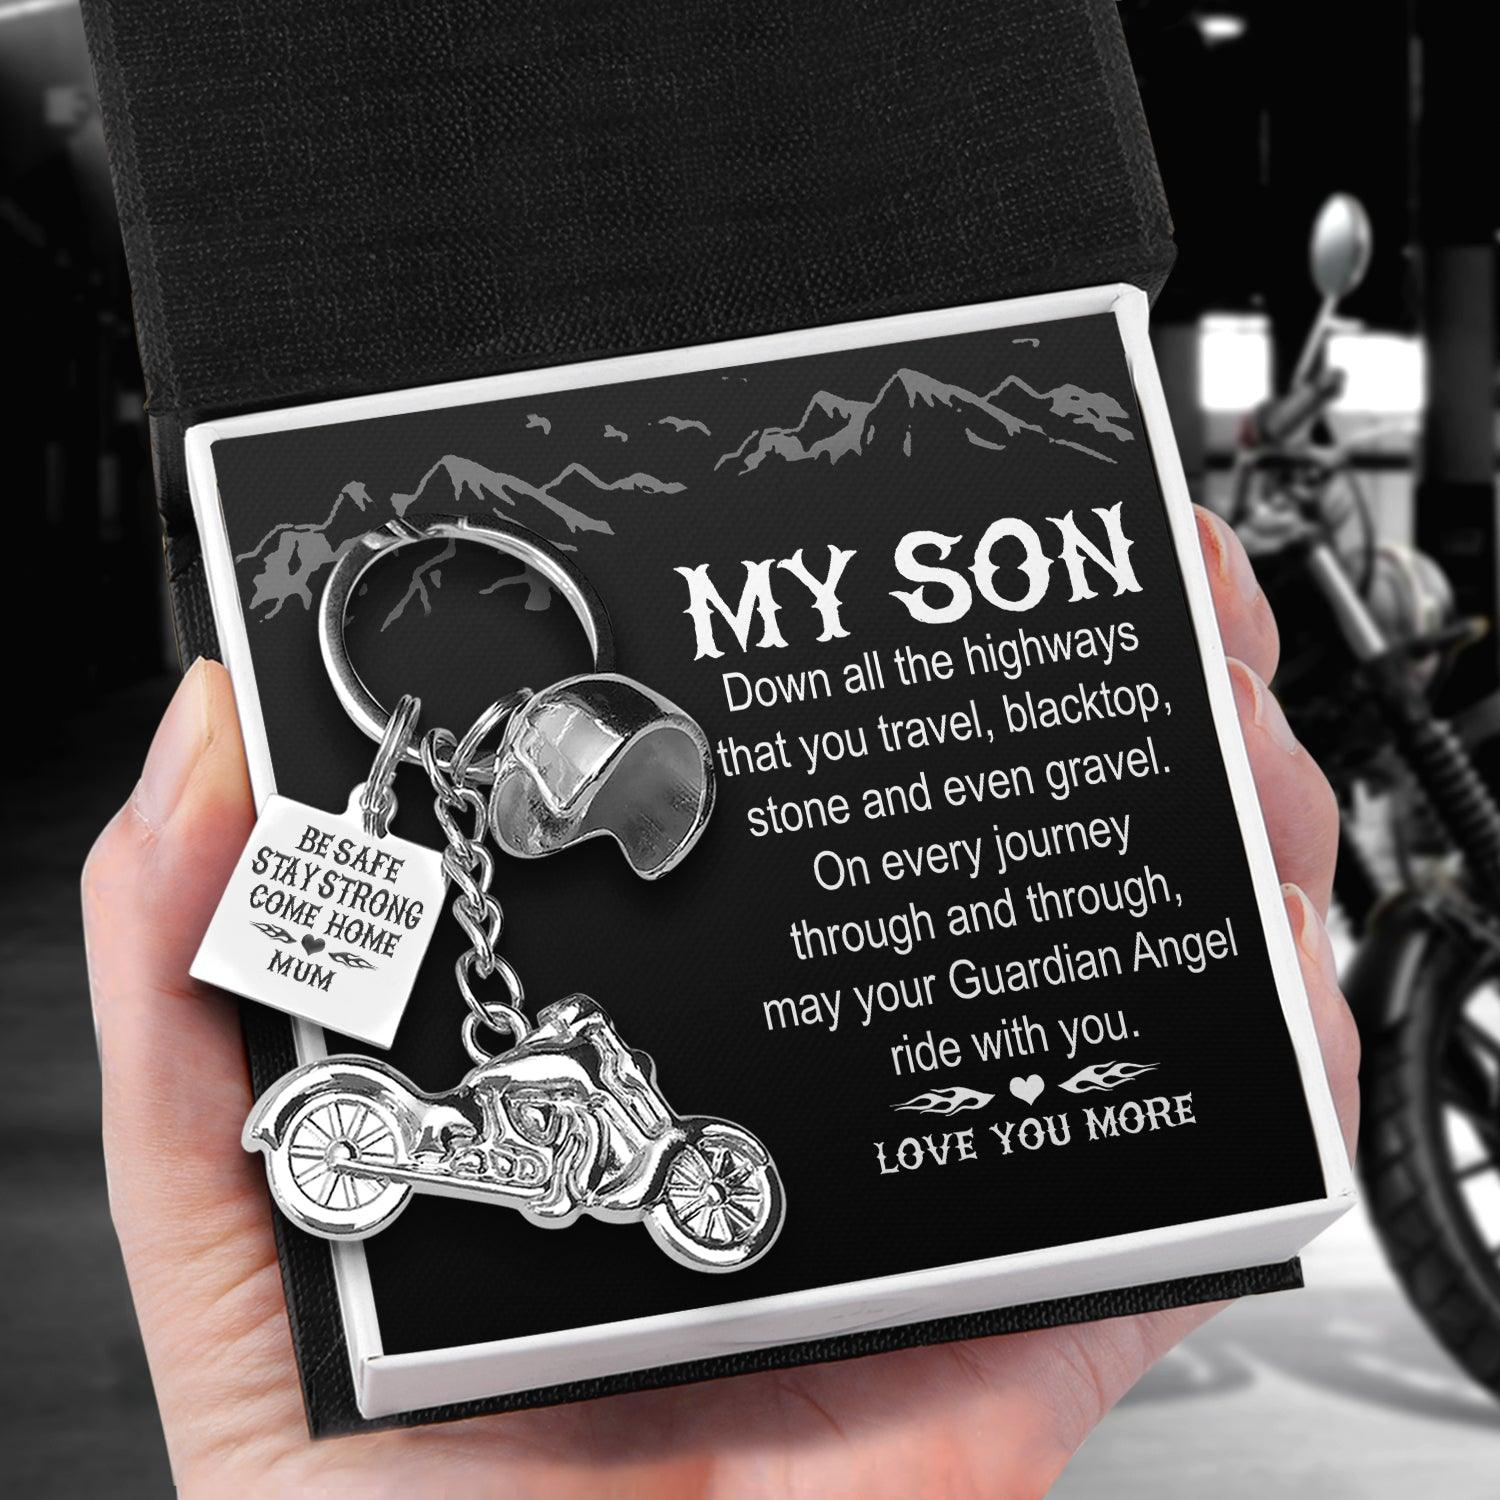 Classic Bike Keychain - Biker - To My Son - Be Safe, Stay Strong, Come Home - Augkt16017 - Gifts Holder